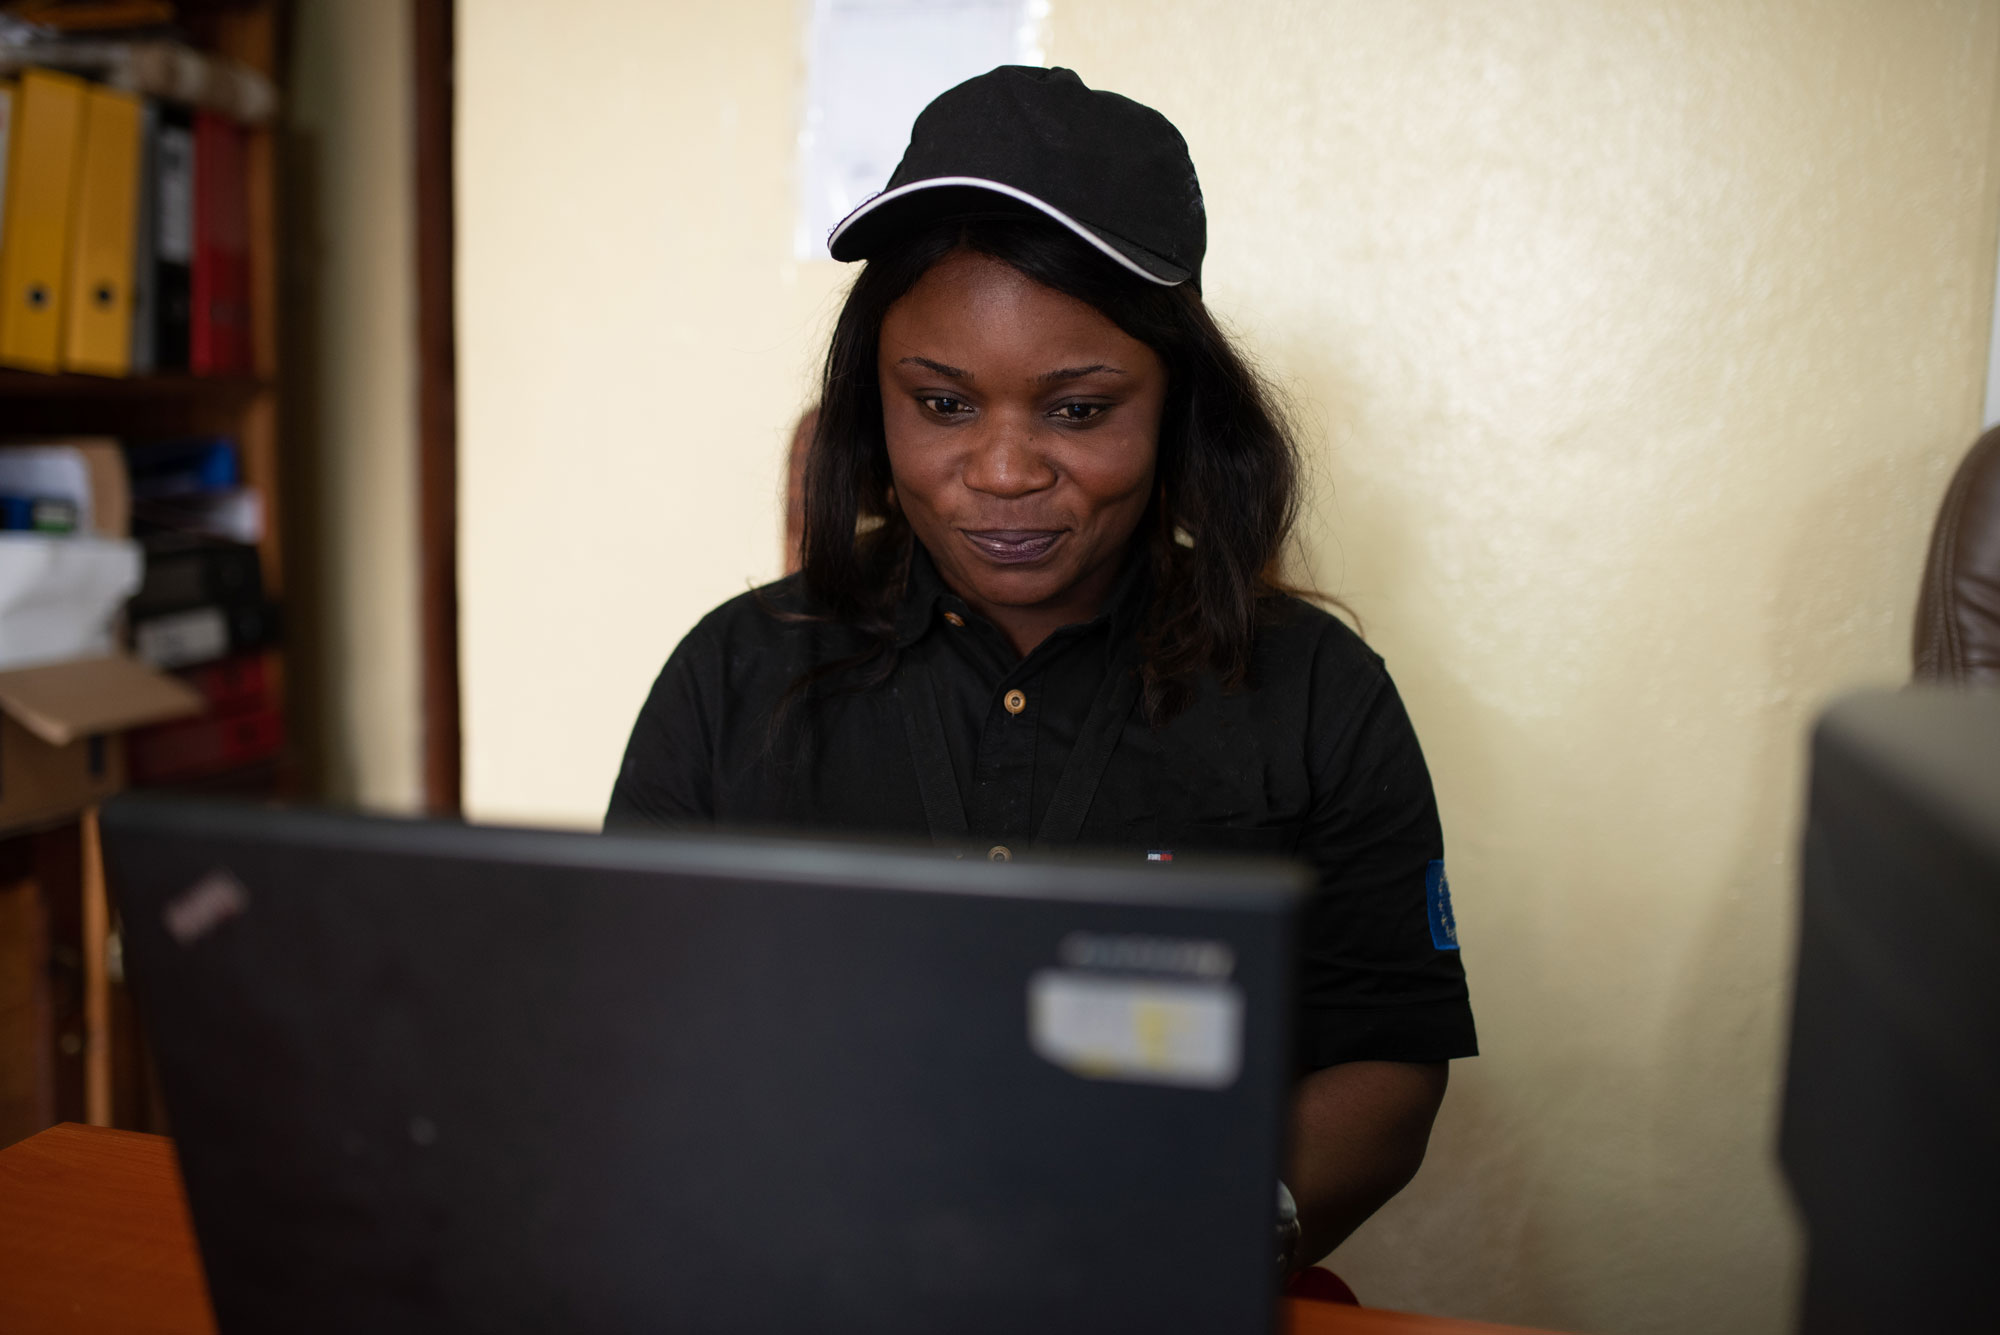 A refugee resettlement caseworker looking at her computer while at work. IRC/OAcland